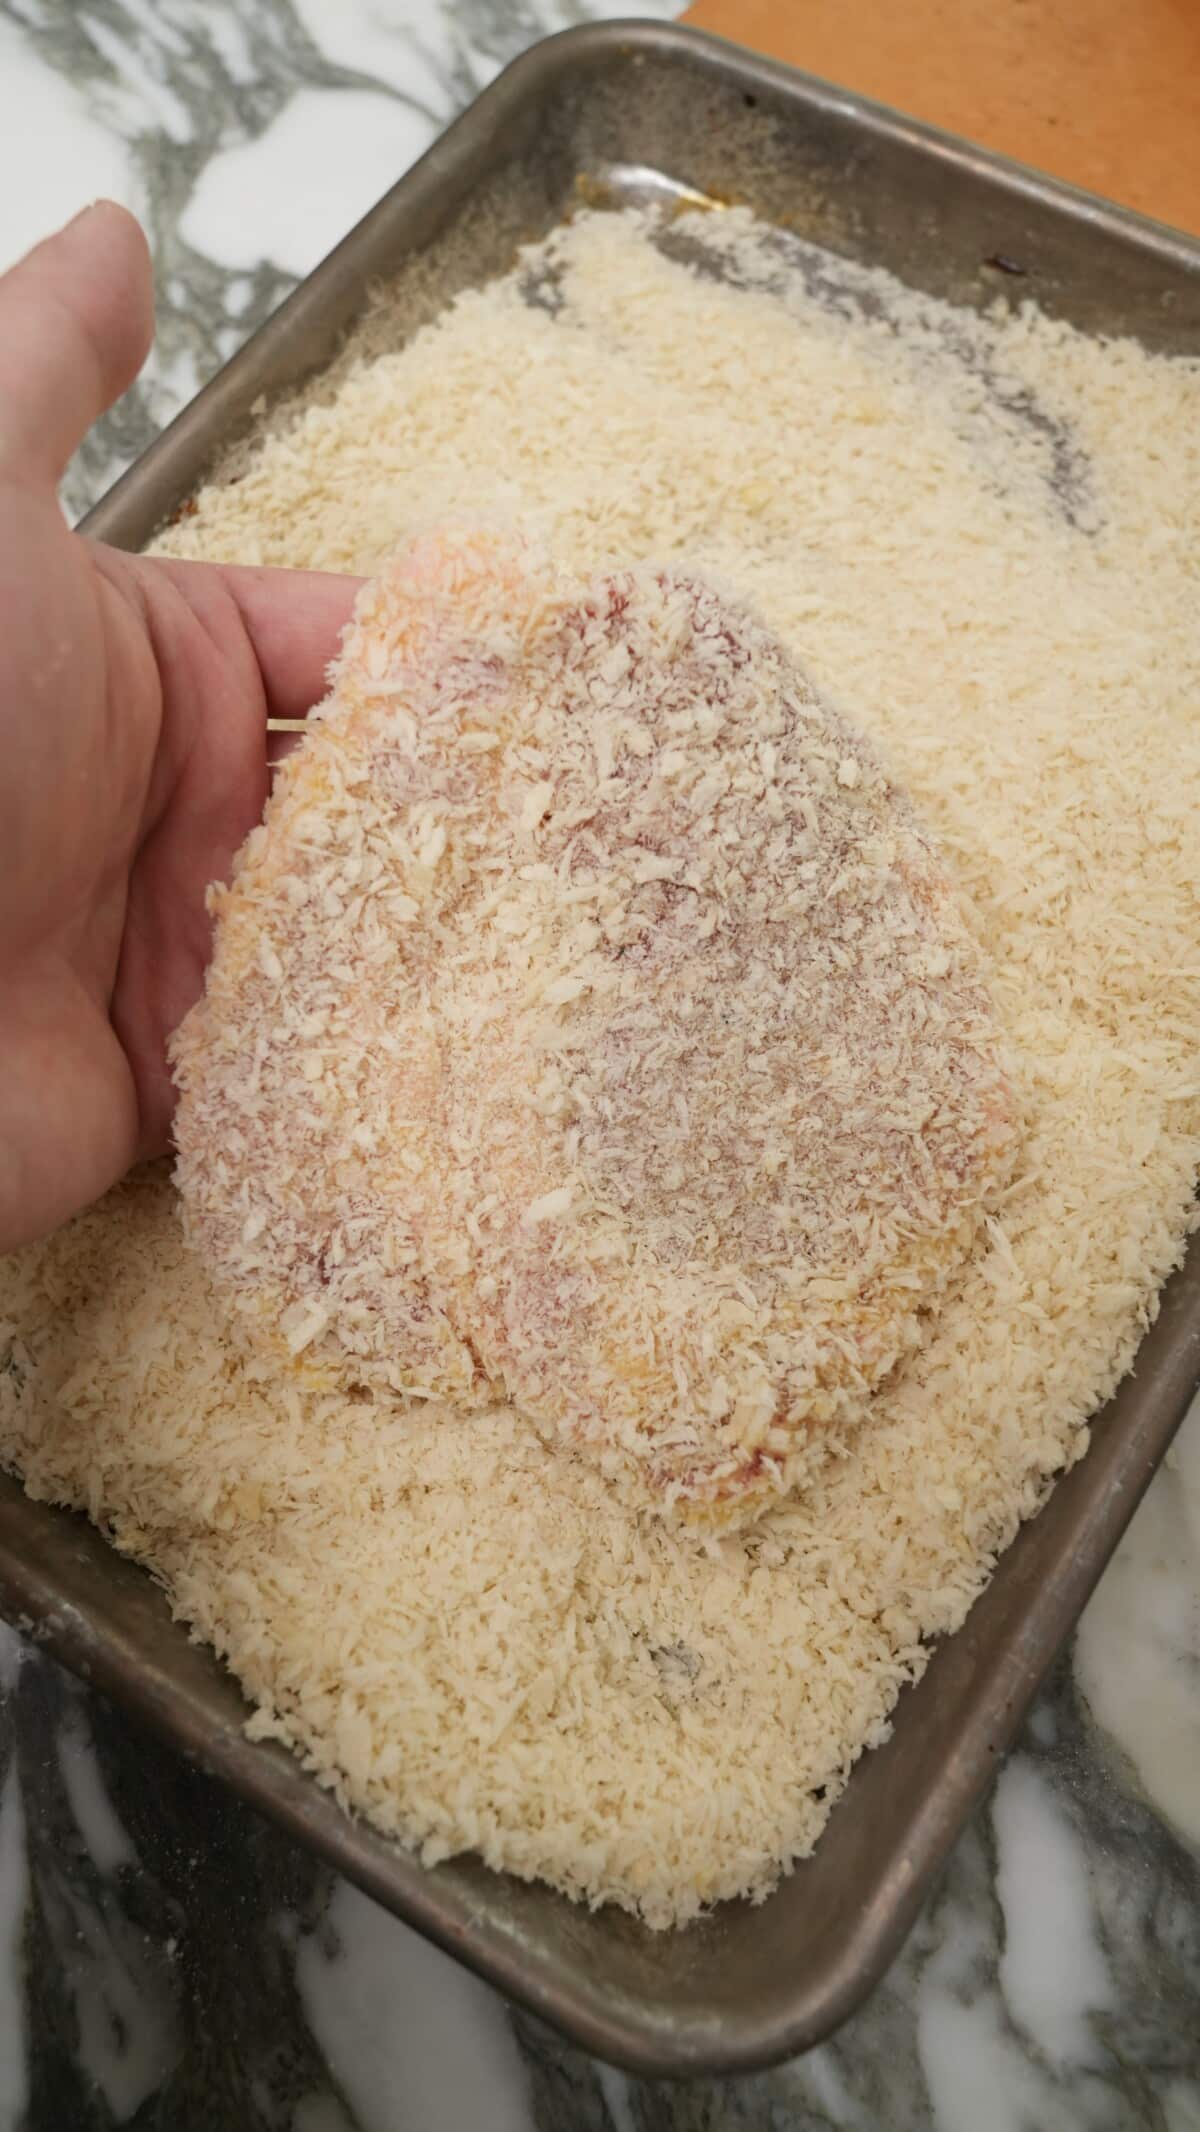 A piece of pork loin being coated in panko breadcrumbs.